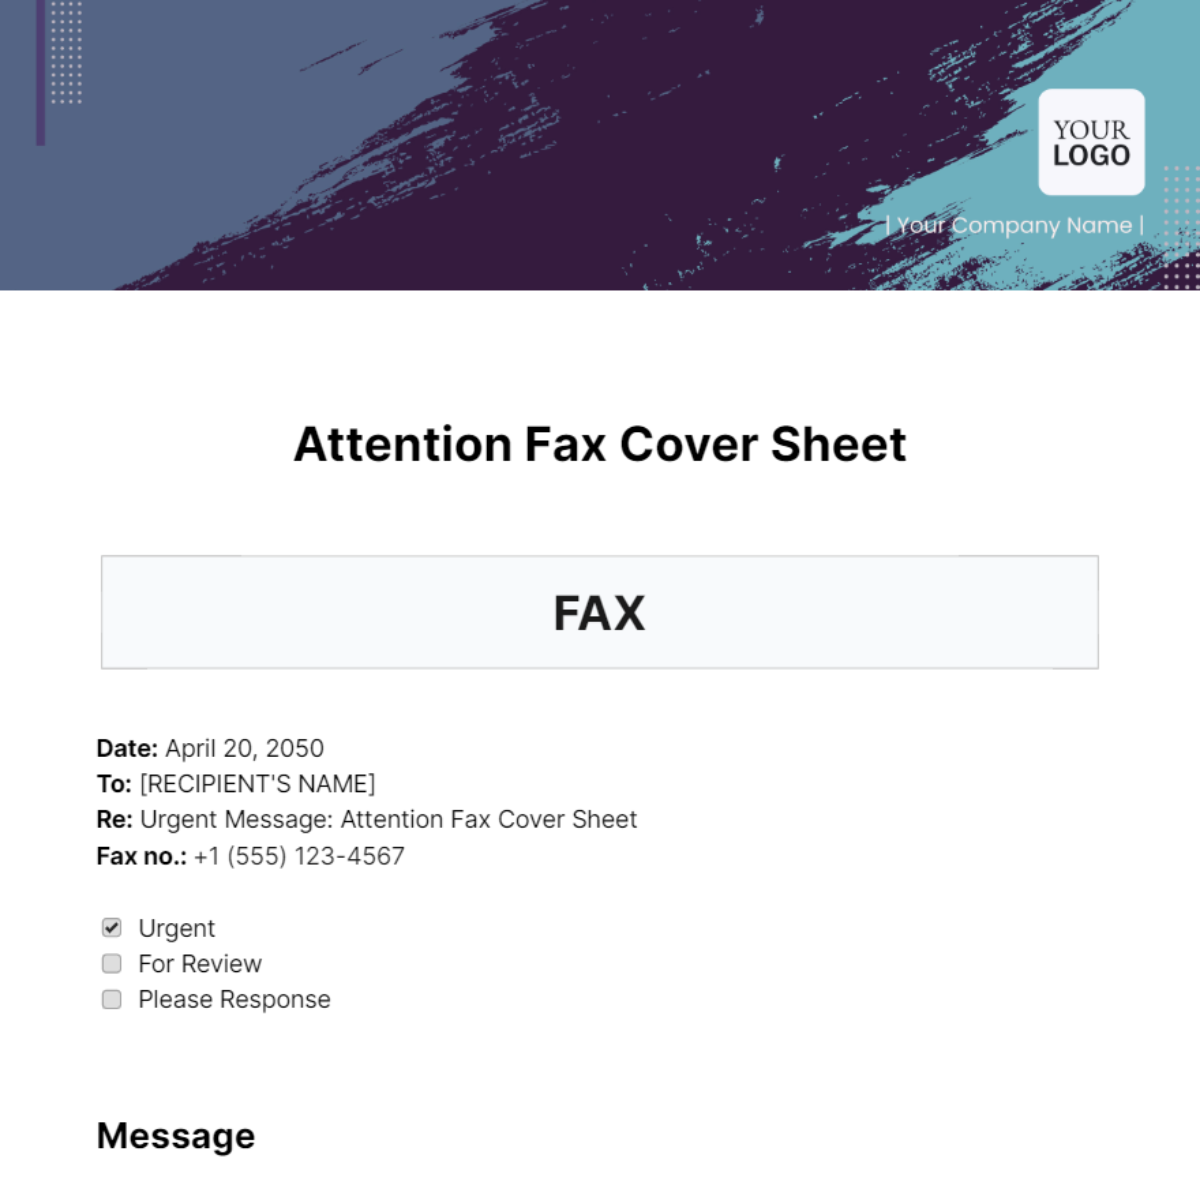 Attention Fax Cover Sheet